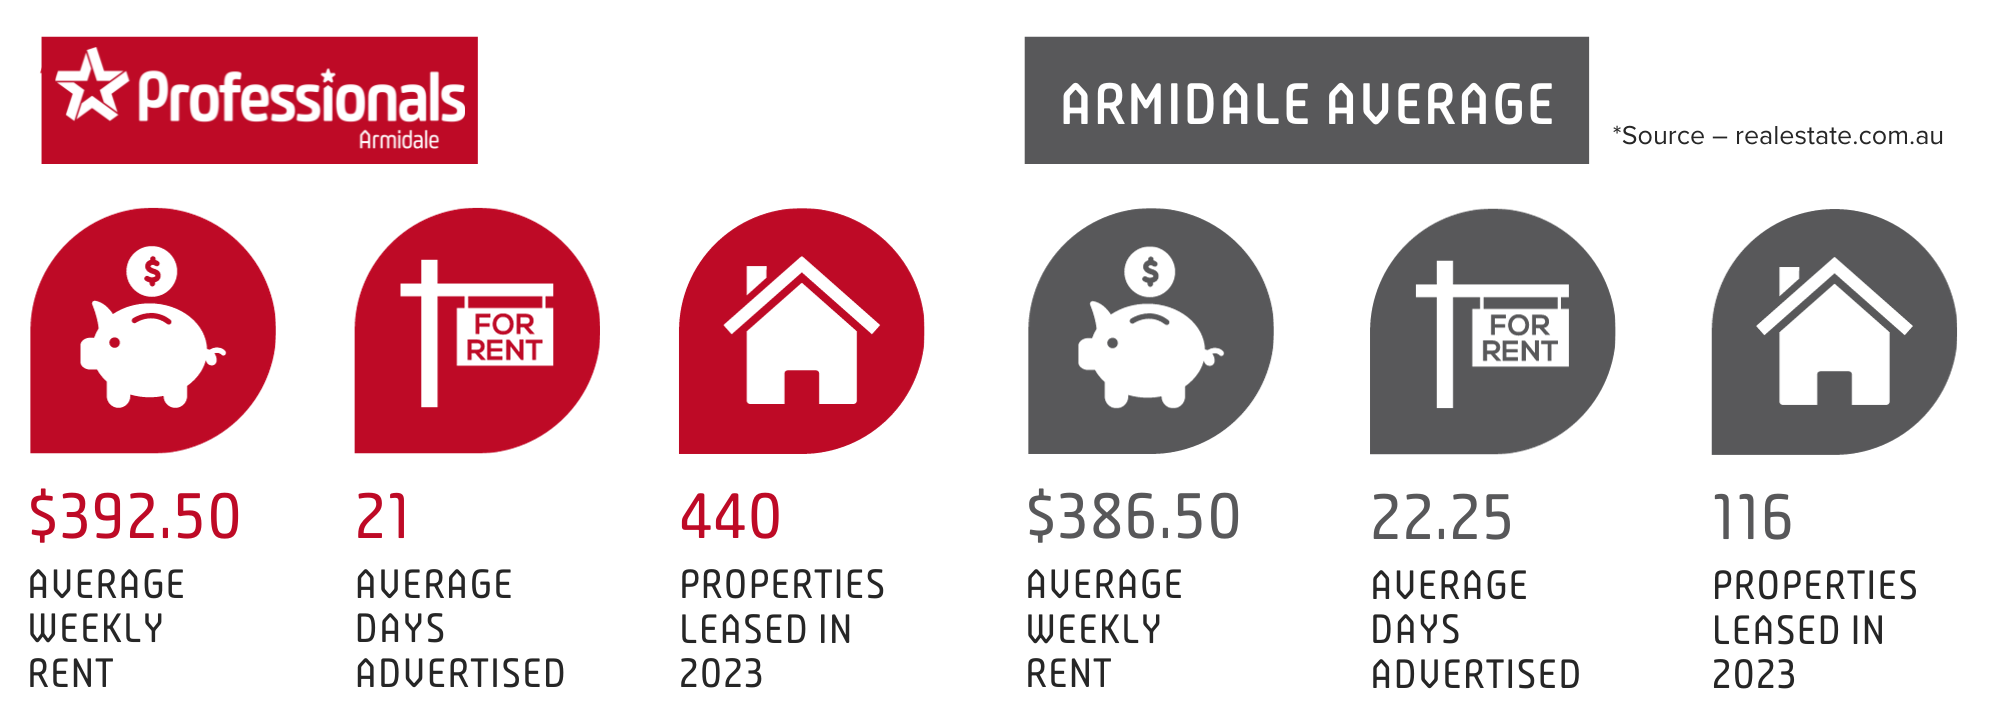 How does Professionals Armidale stack up? Professionals Armidale Property Management 2023 statistics infographic